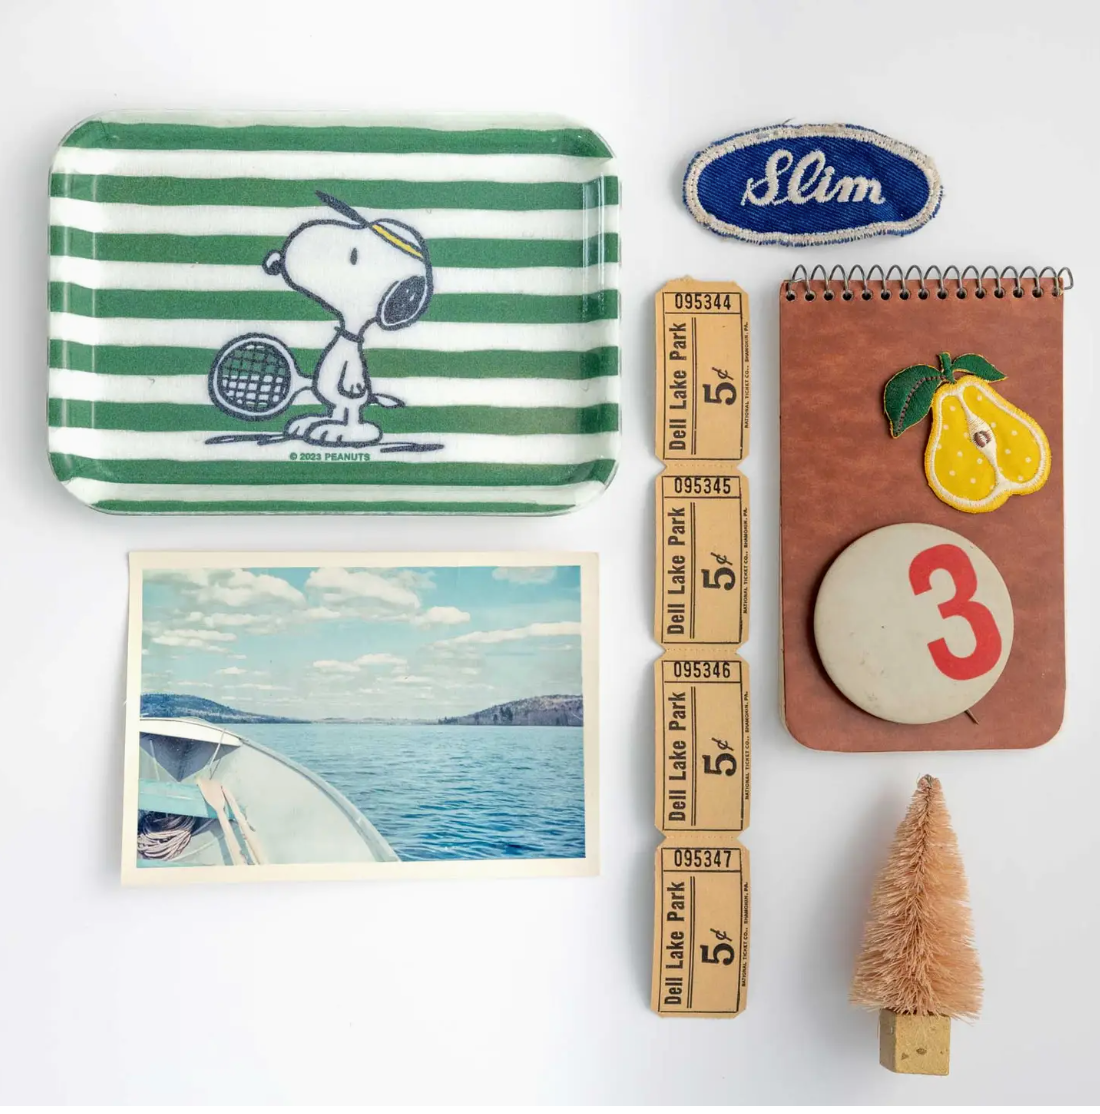 Assorted items on a white background: a Peanuts Tray with Snoopy playing tennis, a "Slim" patch, a photo of a boat at sea near Scottsdale, Arizona, a folded ruler, a notepad with a lemon design in front of a bungalow, soap with number 3.